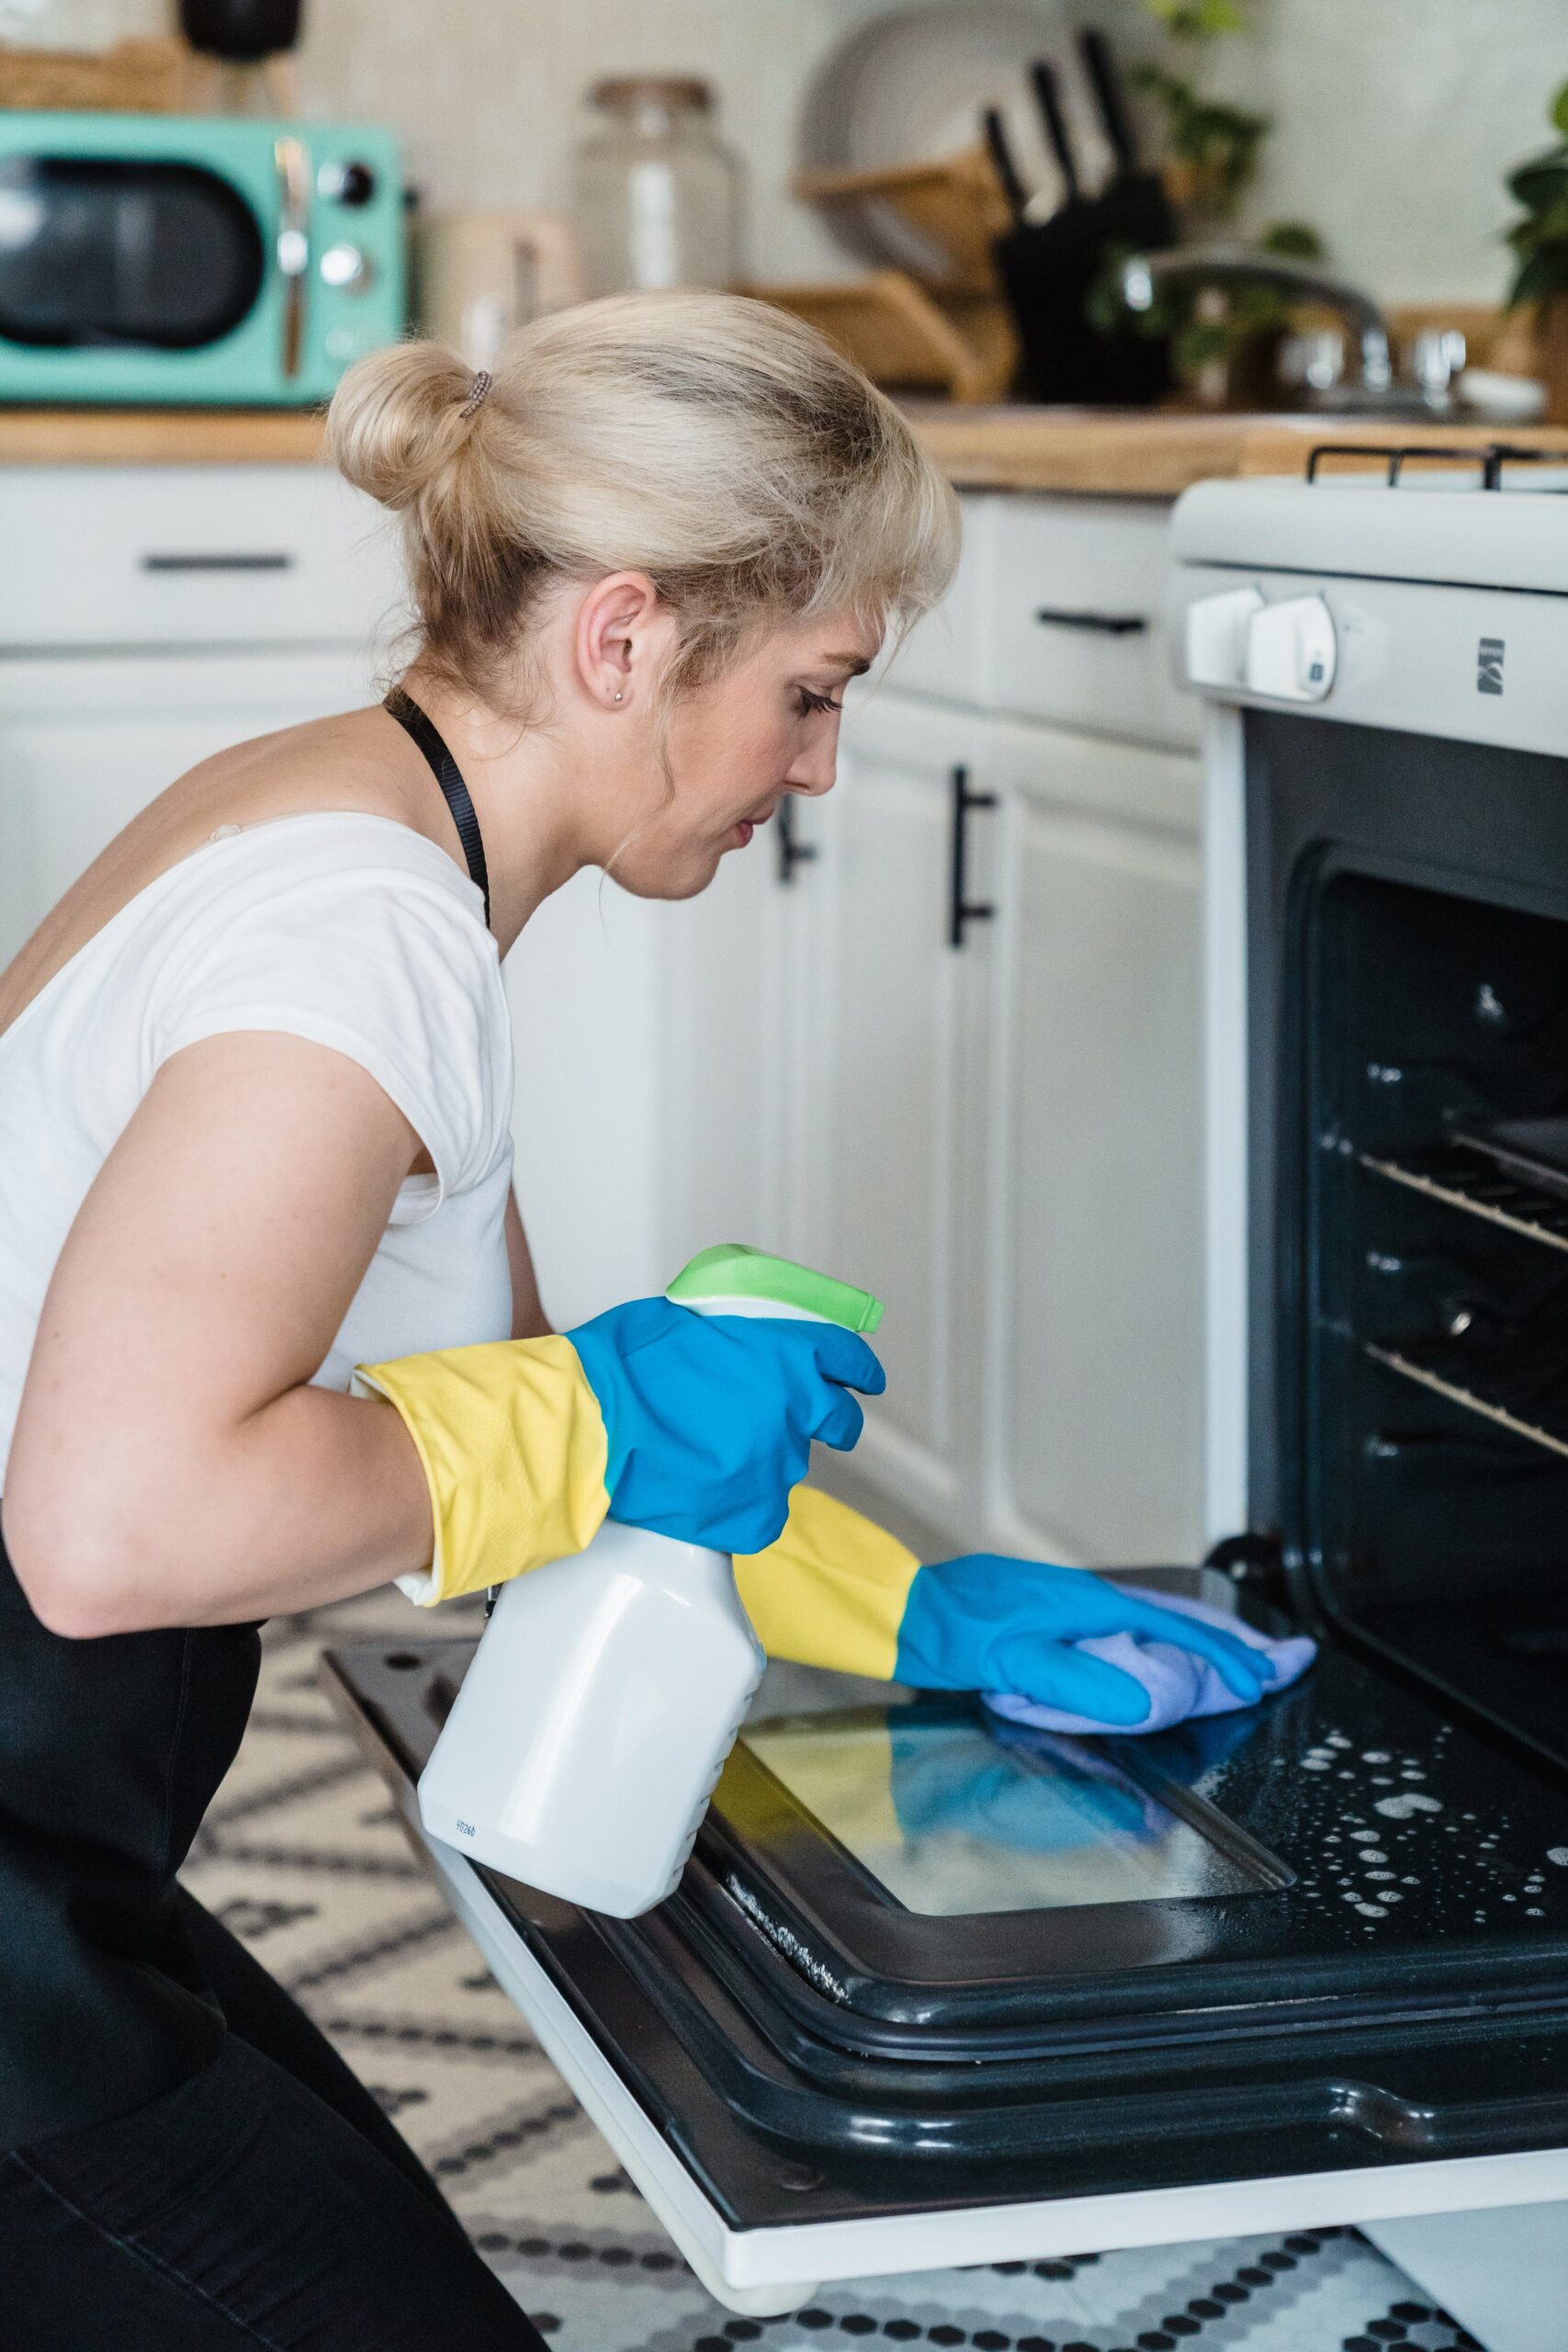 The Professionals Guide to Kitchen Cleaning